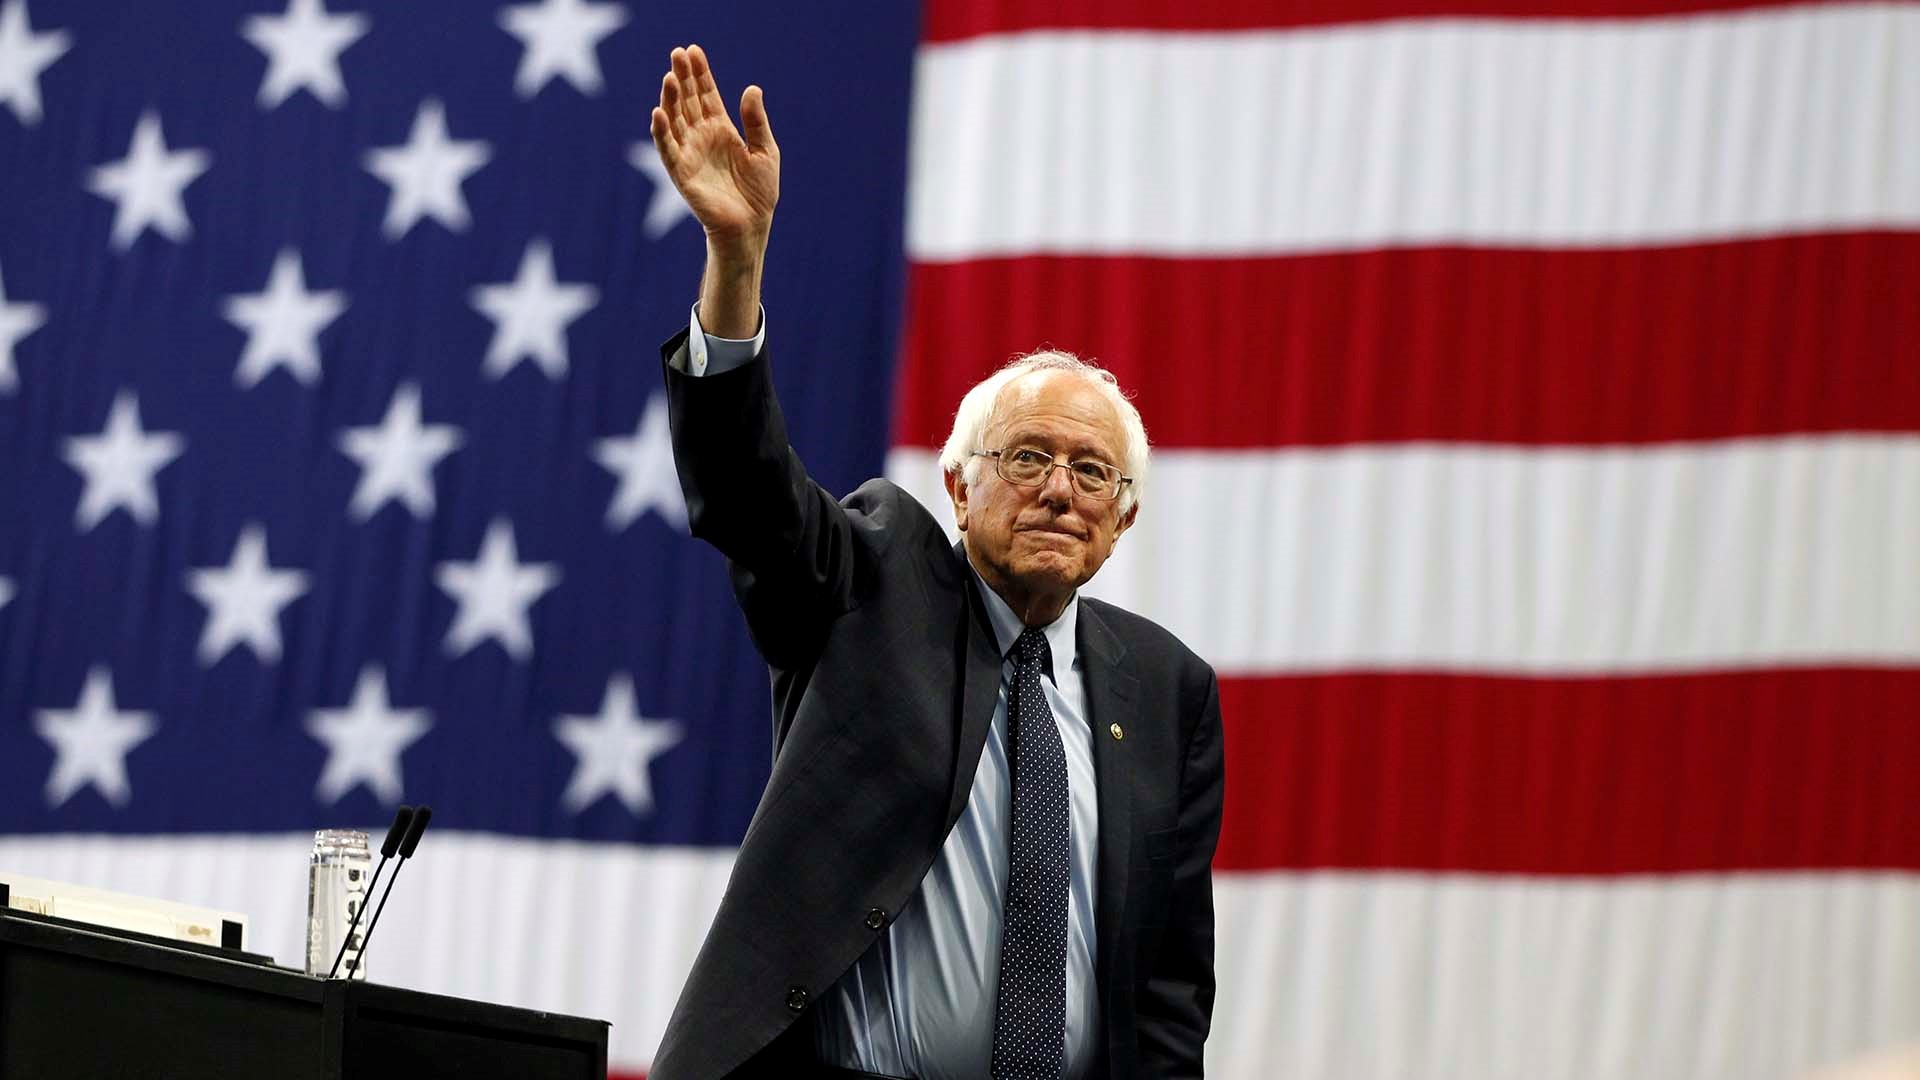 Learn more about Democratic presidential candidate Bernie Sanders.